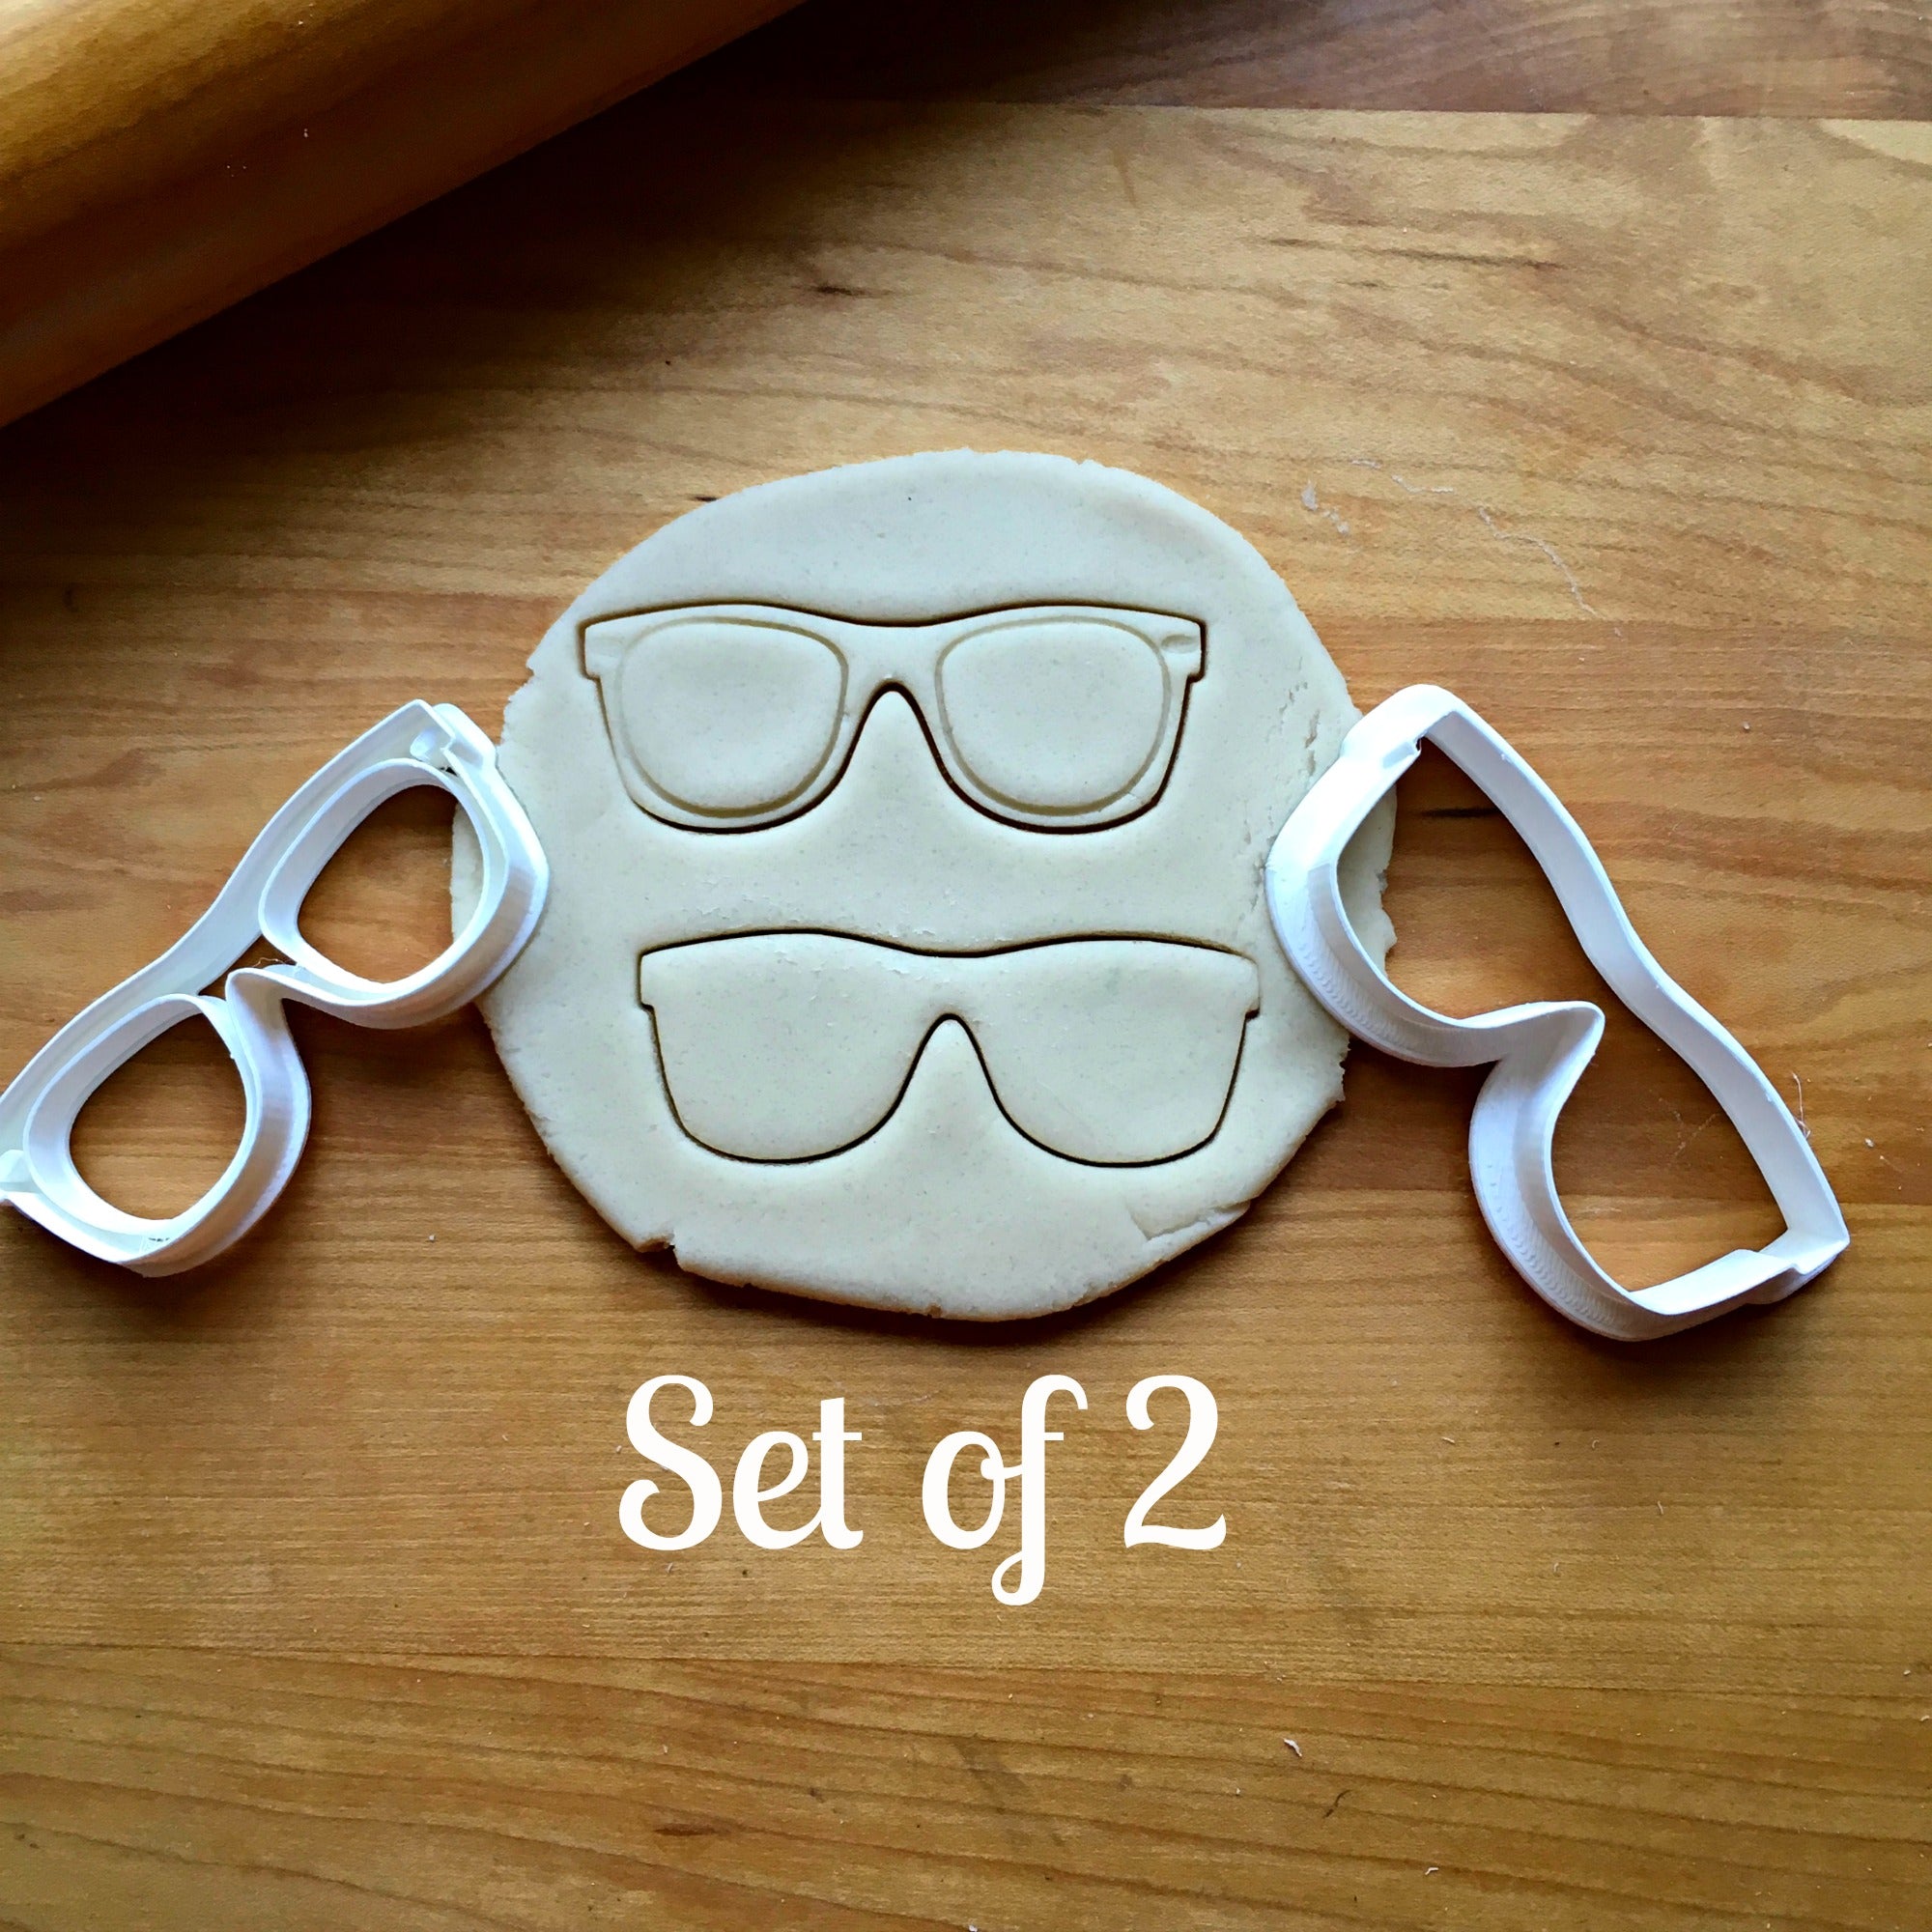 Set of 2 Retro Sunglasses Cookie Cutters/Dishwasher Safe